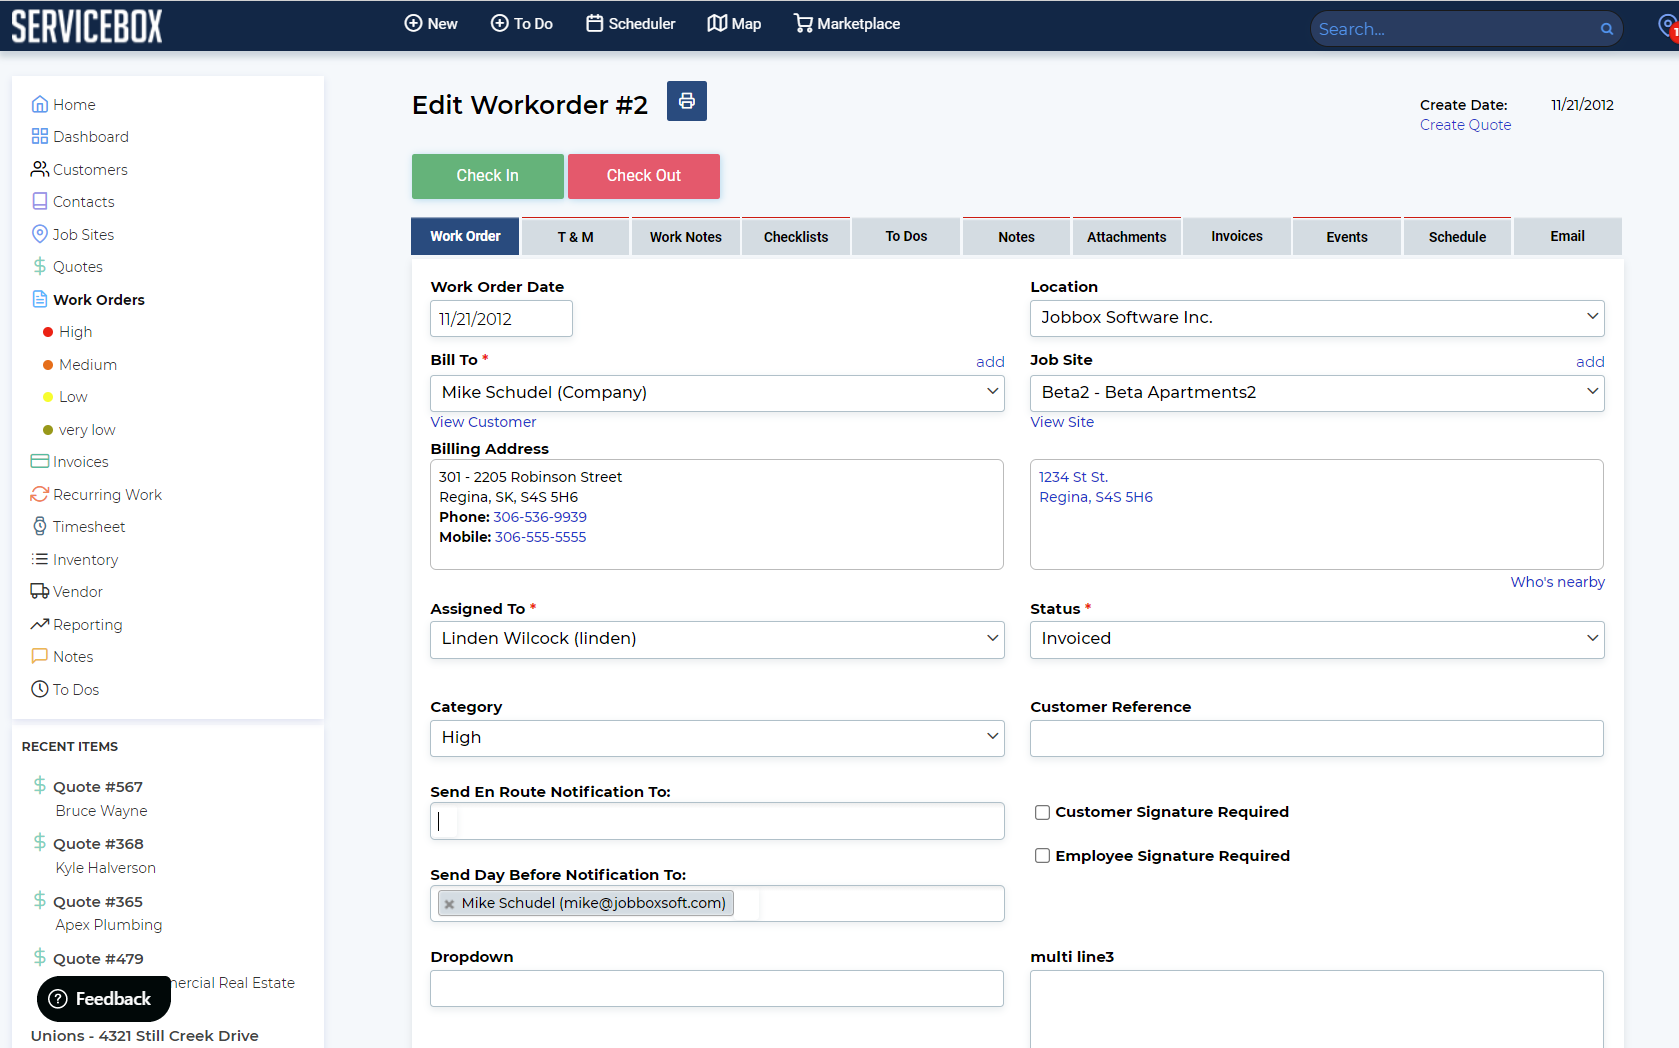 ServiceBox Software - Work Orders are where the details of the work to be completed is entered.  Check in an out of a job, add time and materials, take pictures, enter job notes, create maintenance checklists, and easily schedule technicians.